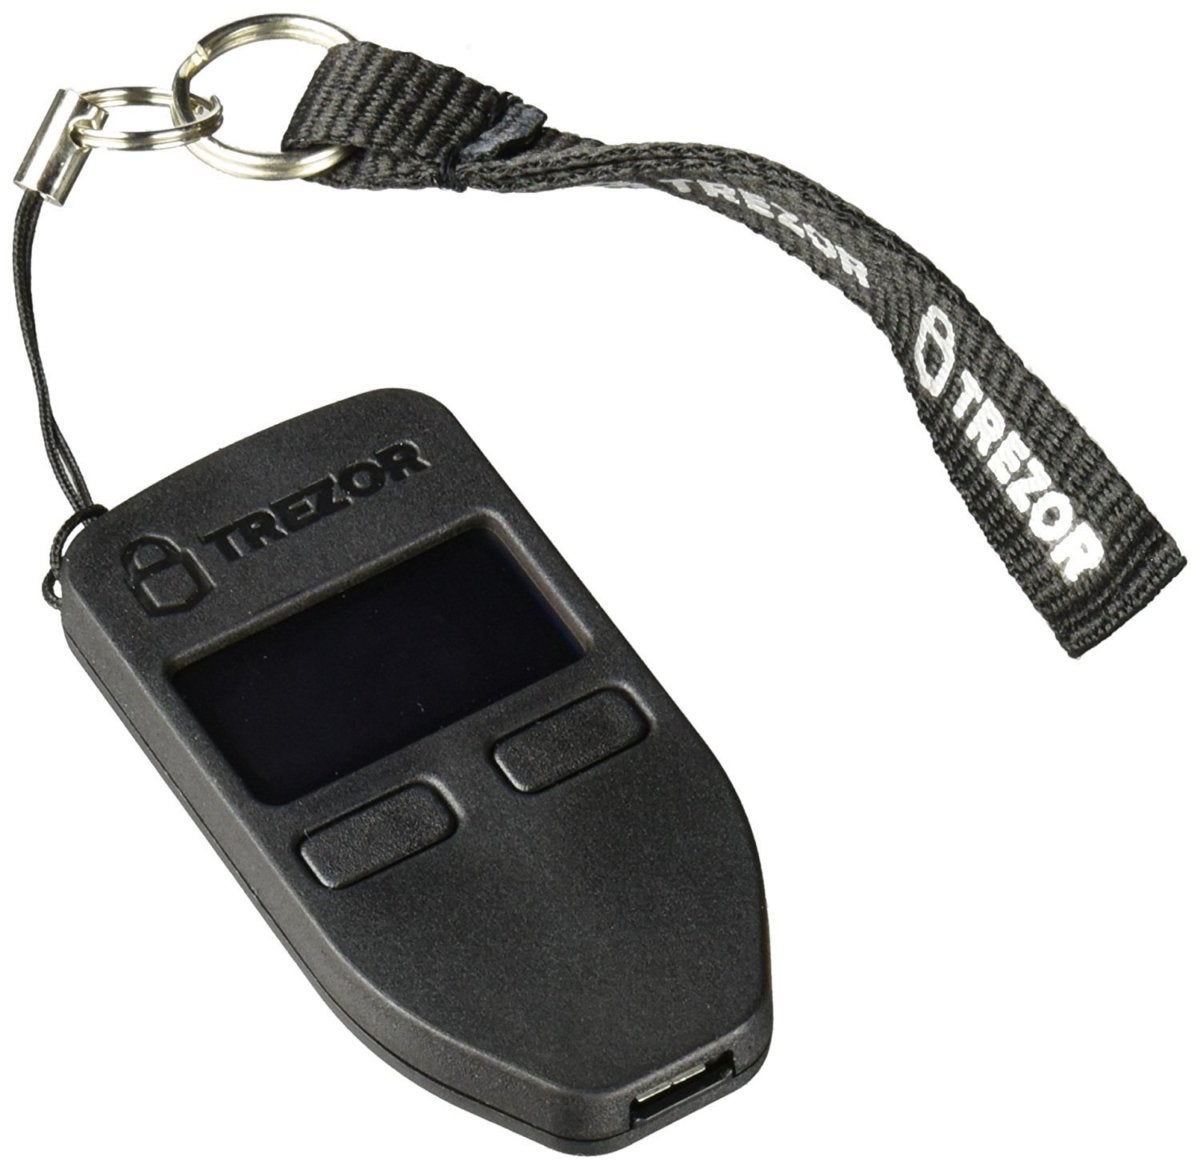 Trezor Bitcoin Wallet Just $73 on Amazon Right Now - Deal Alert - ITNews